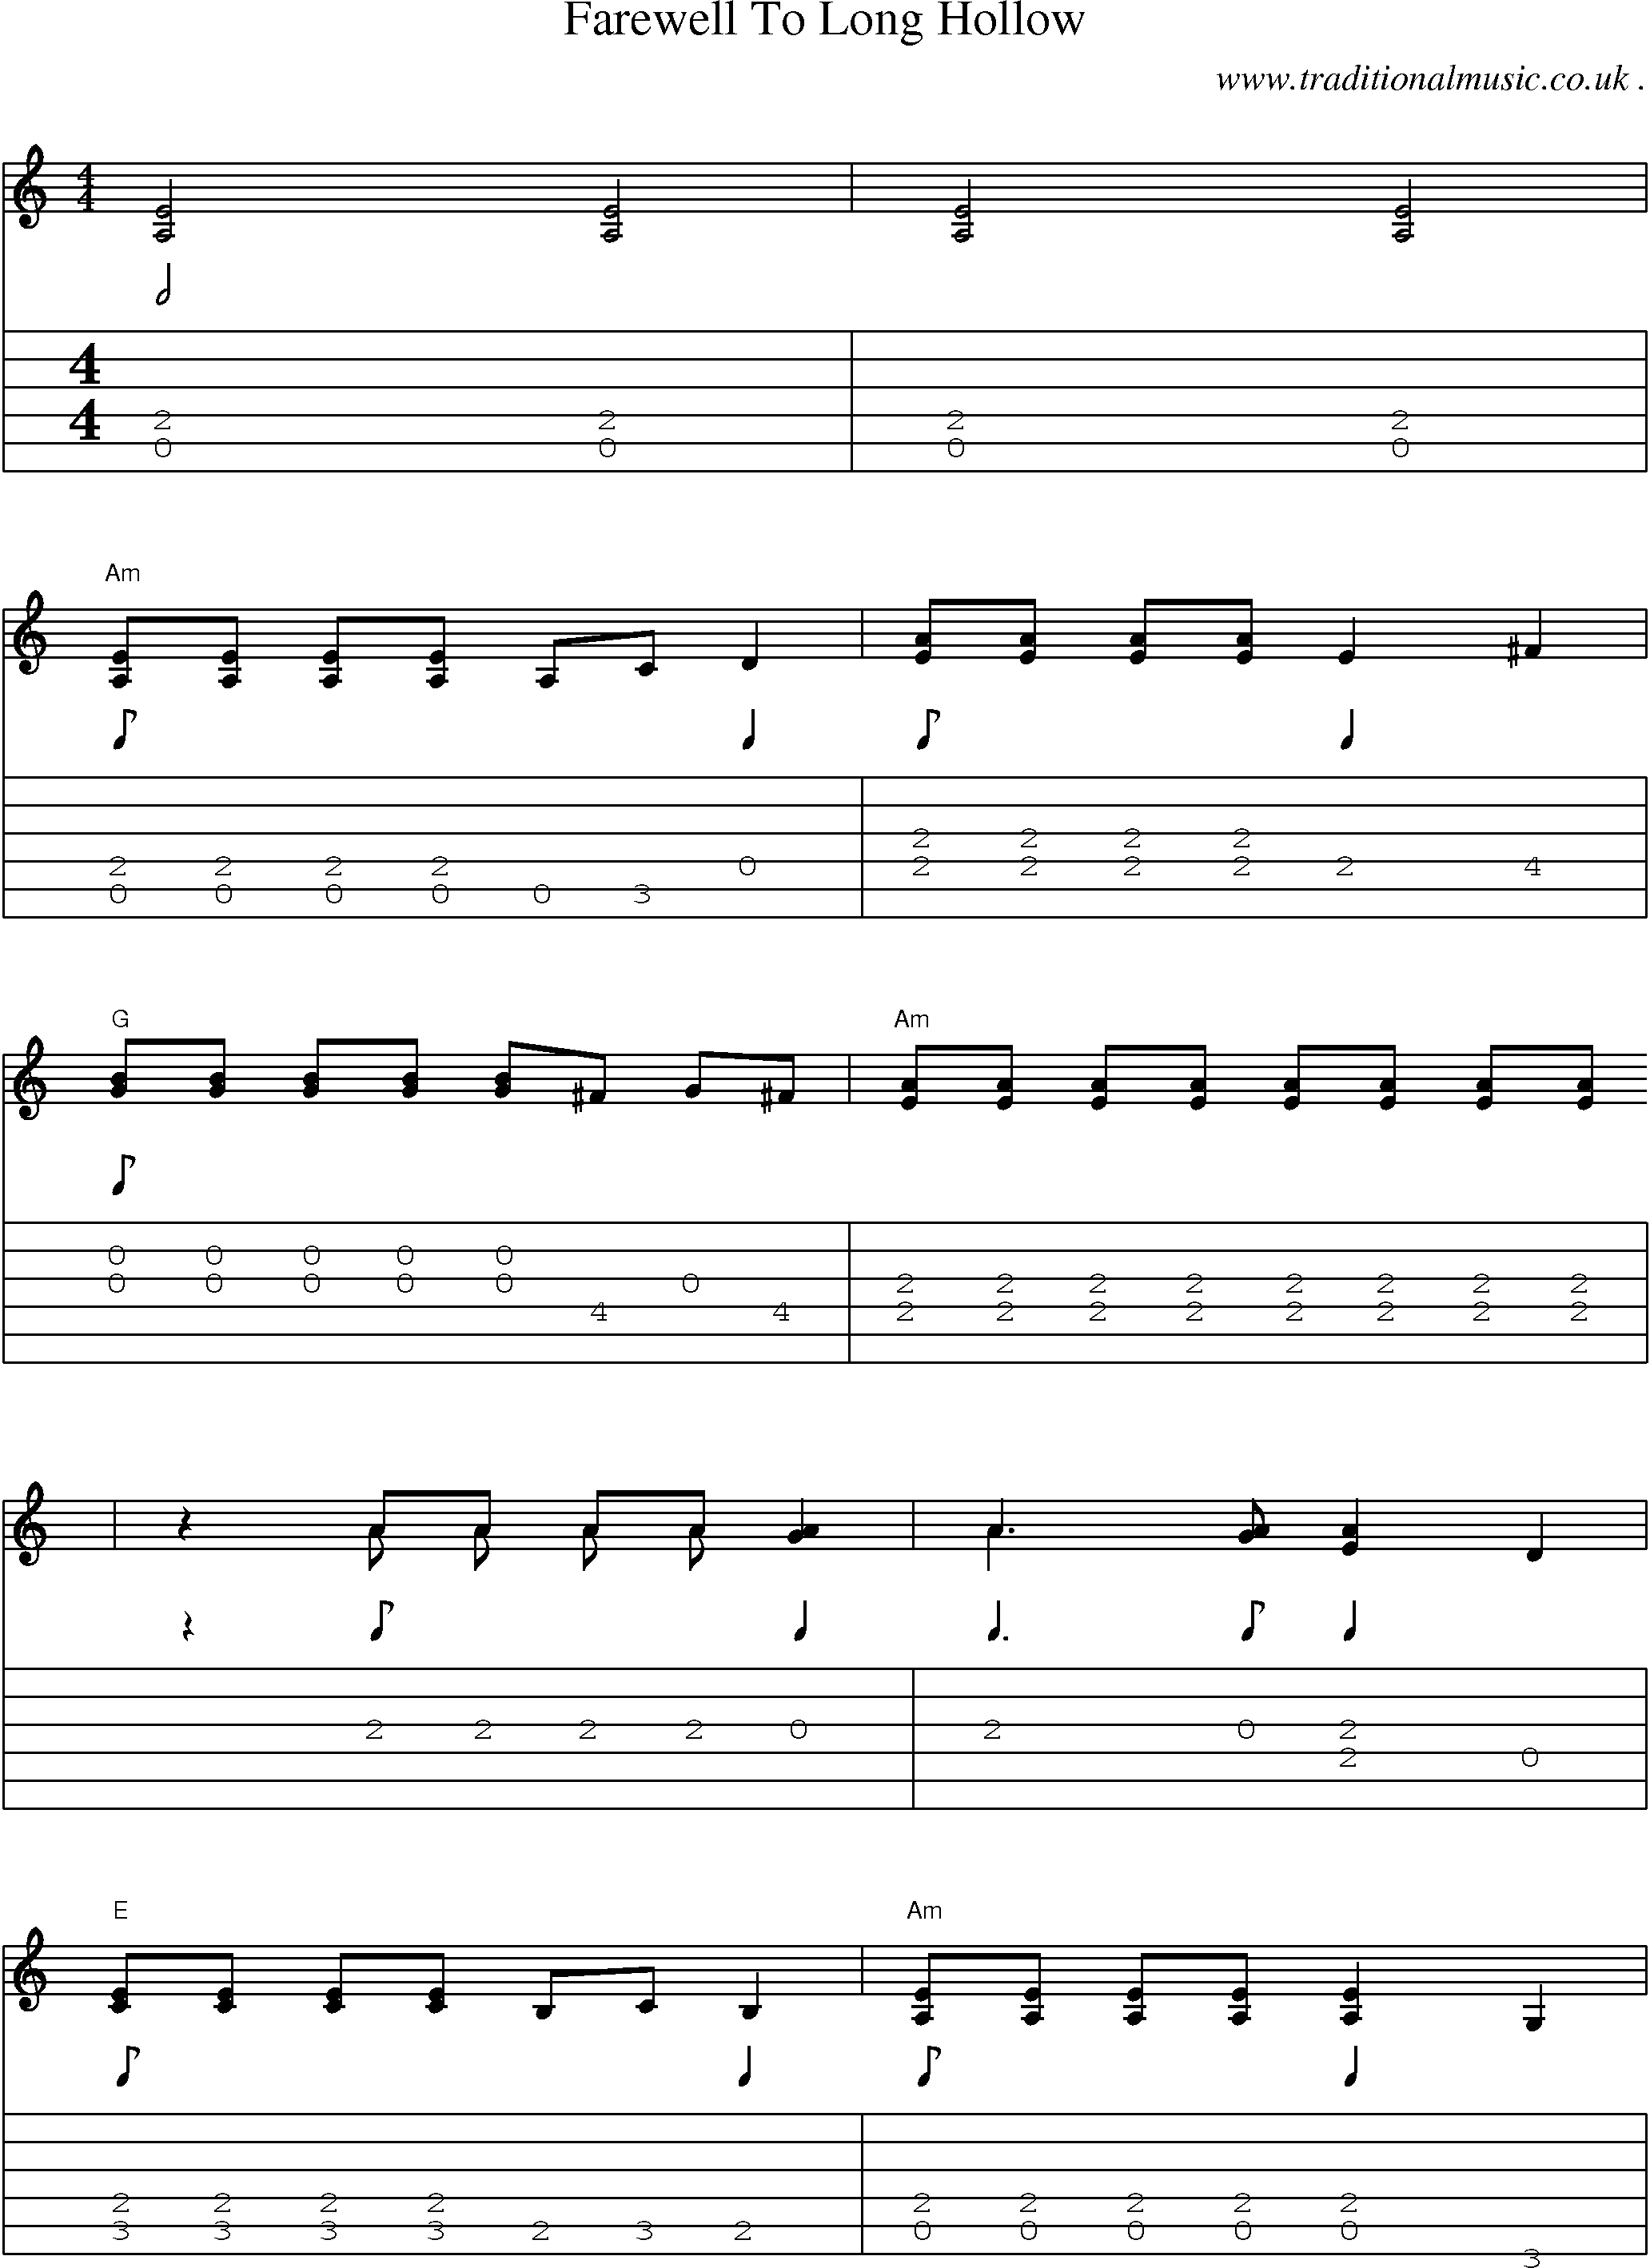 Music Score and Guitar Tabs for Farewell To Long Hollow